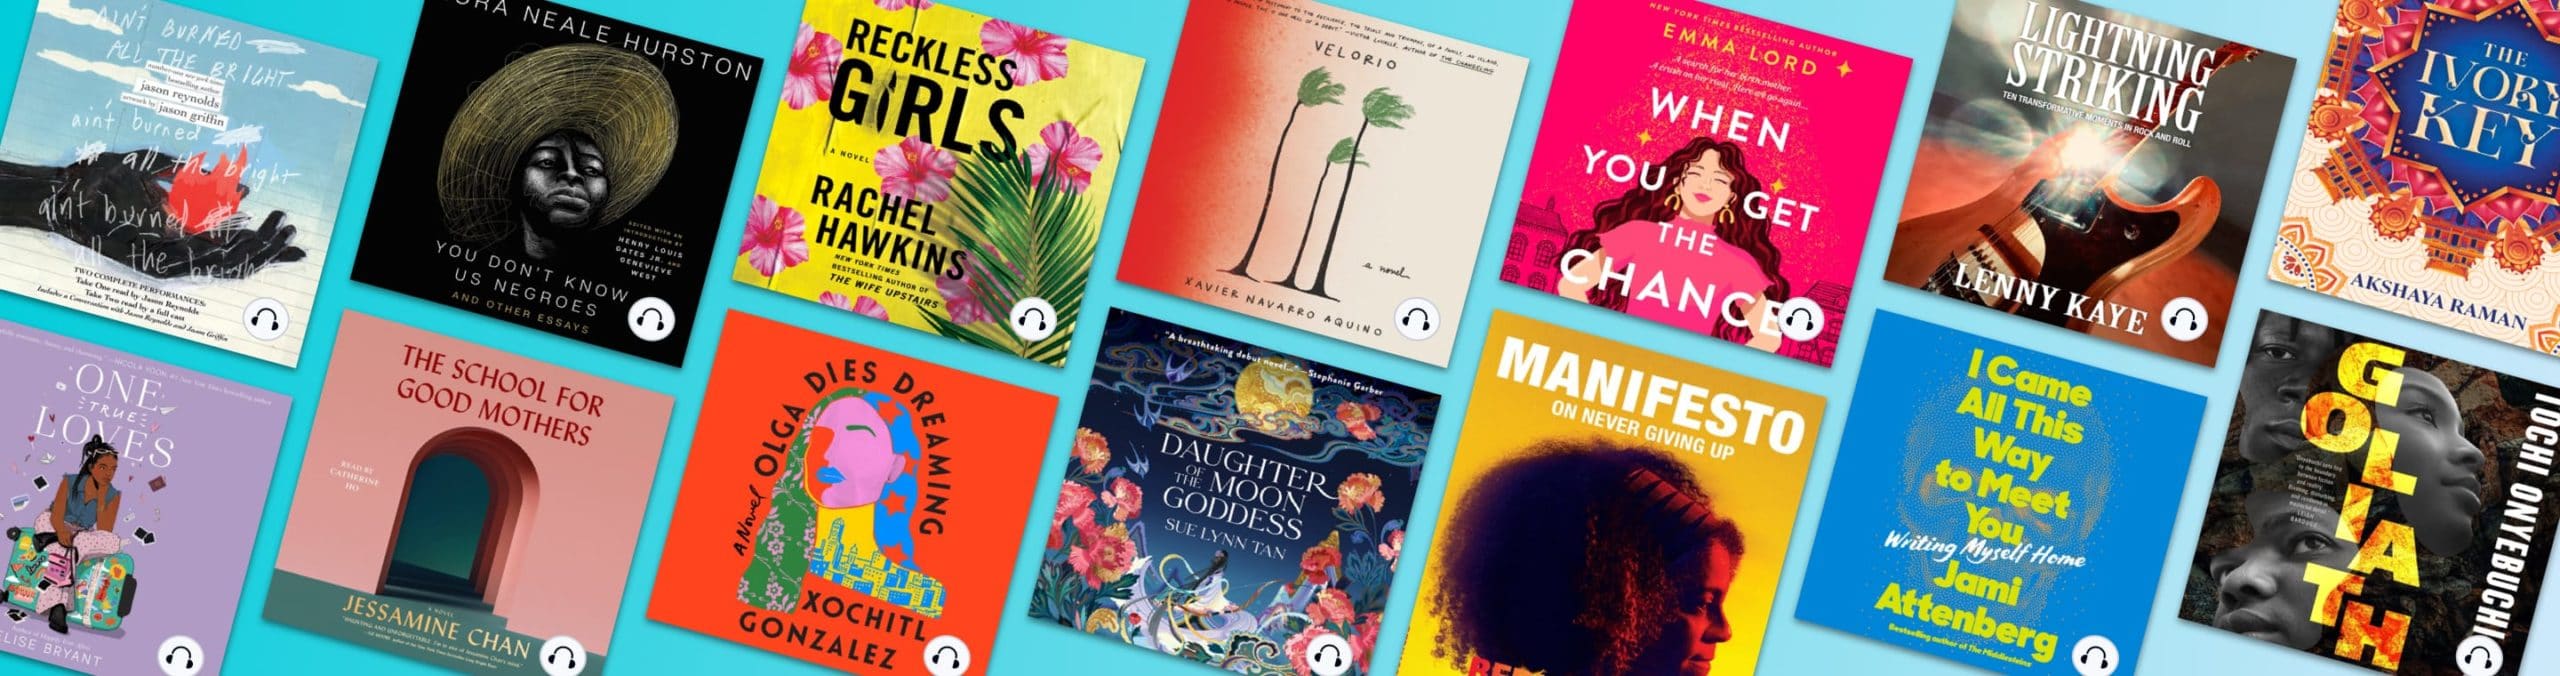 Start the year right with January’s Best New Books